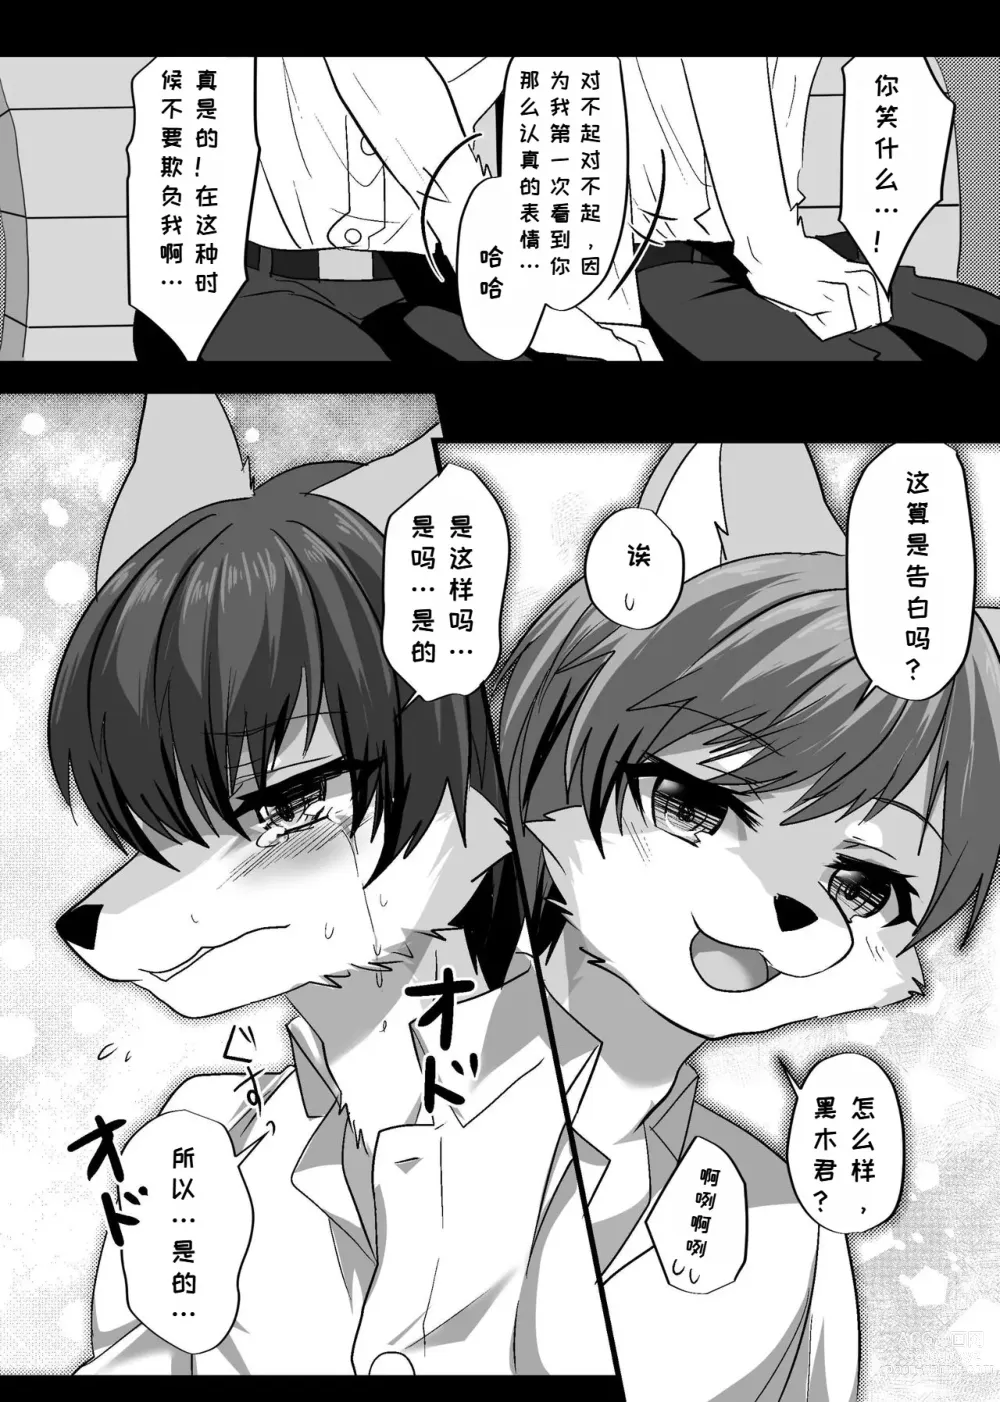 Page 56 of doujinshi 我们发情出勤科 3